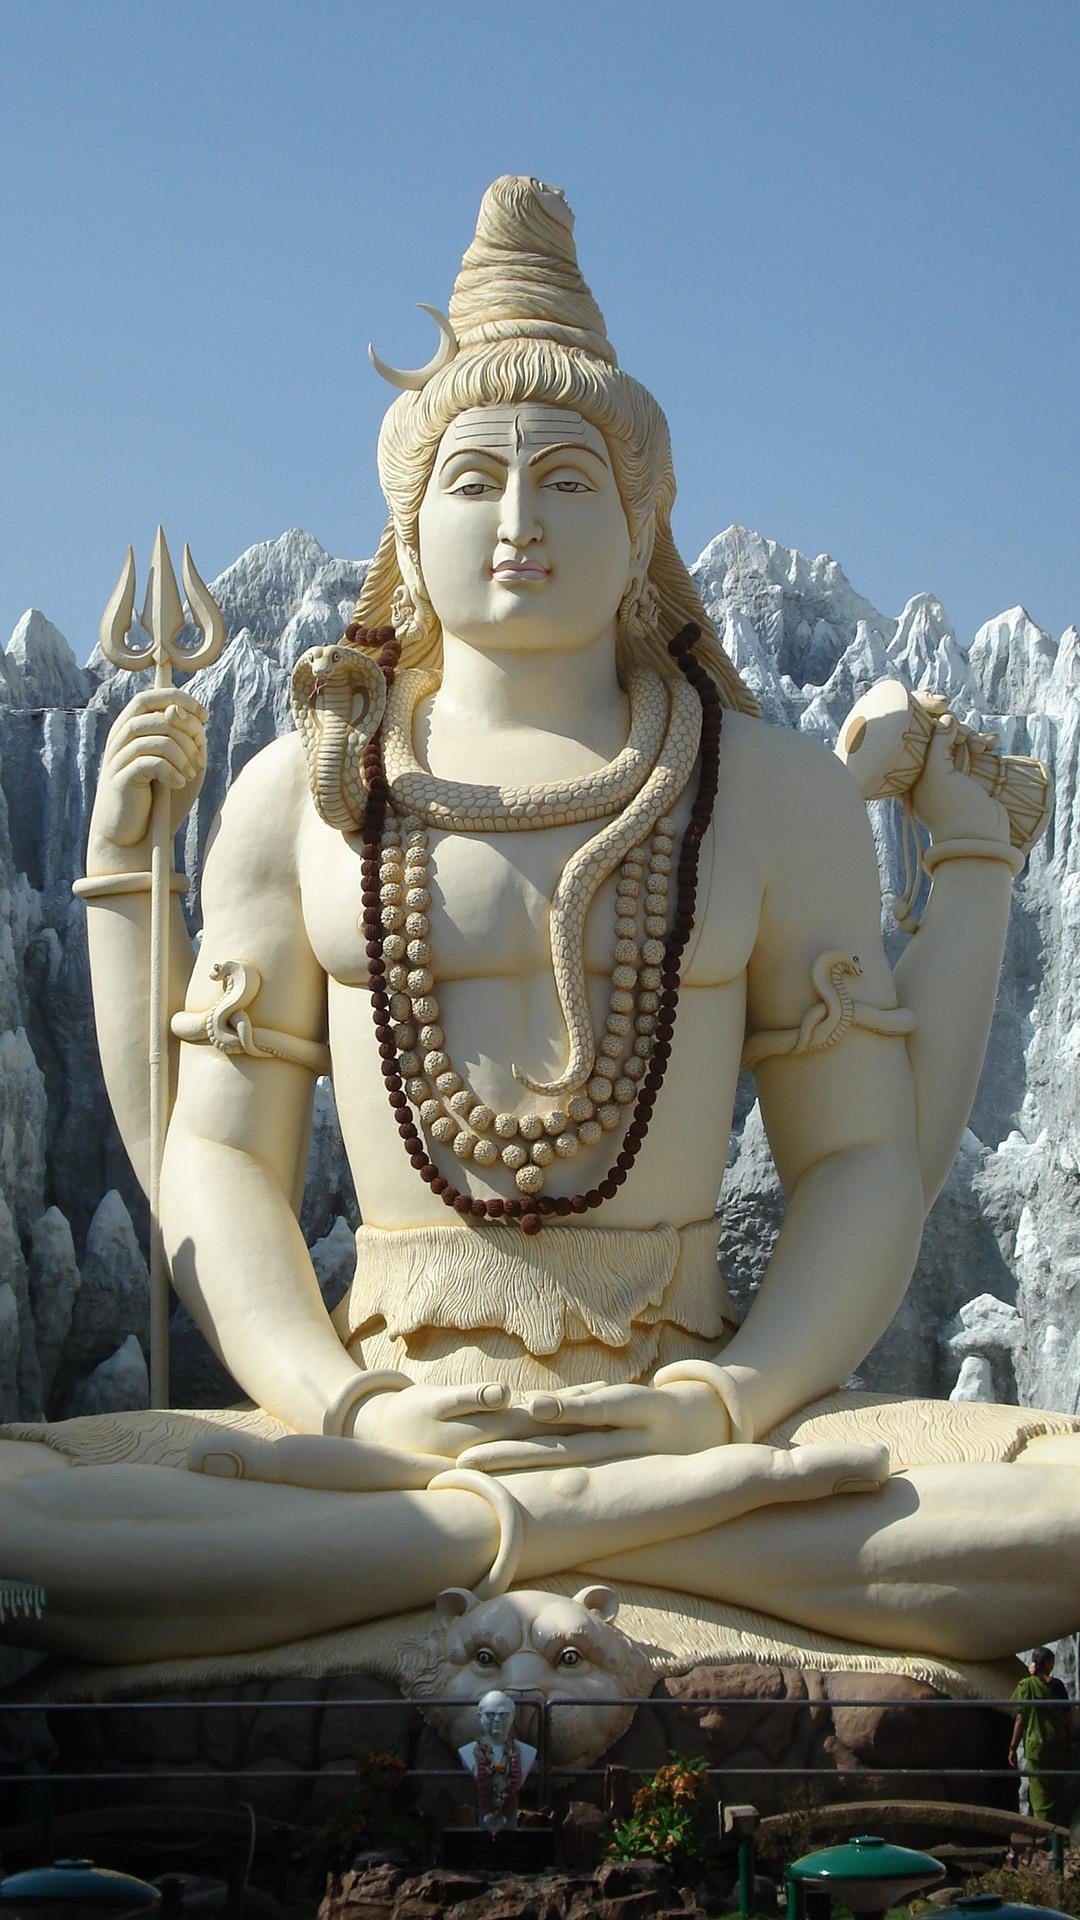 Mobile Lord Shiva Hd Wallpapers - Wallpaper Cave